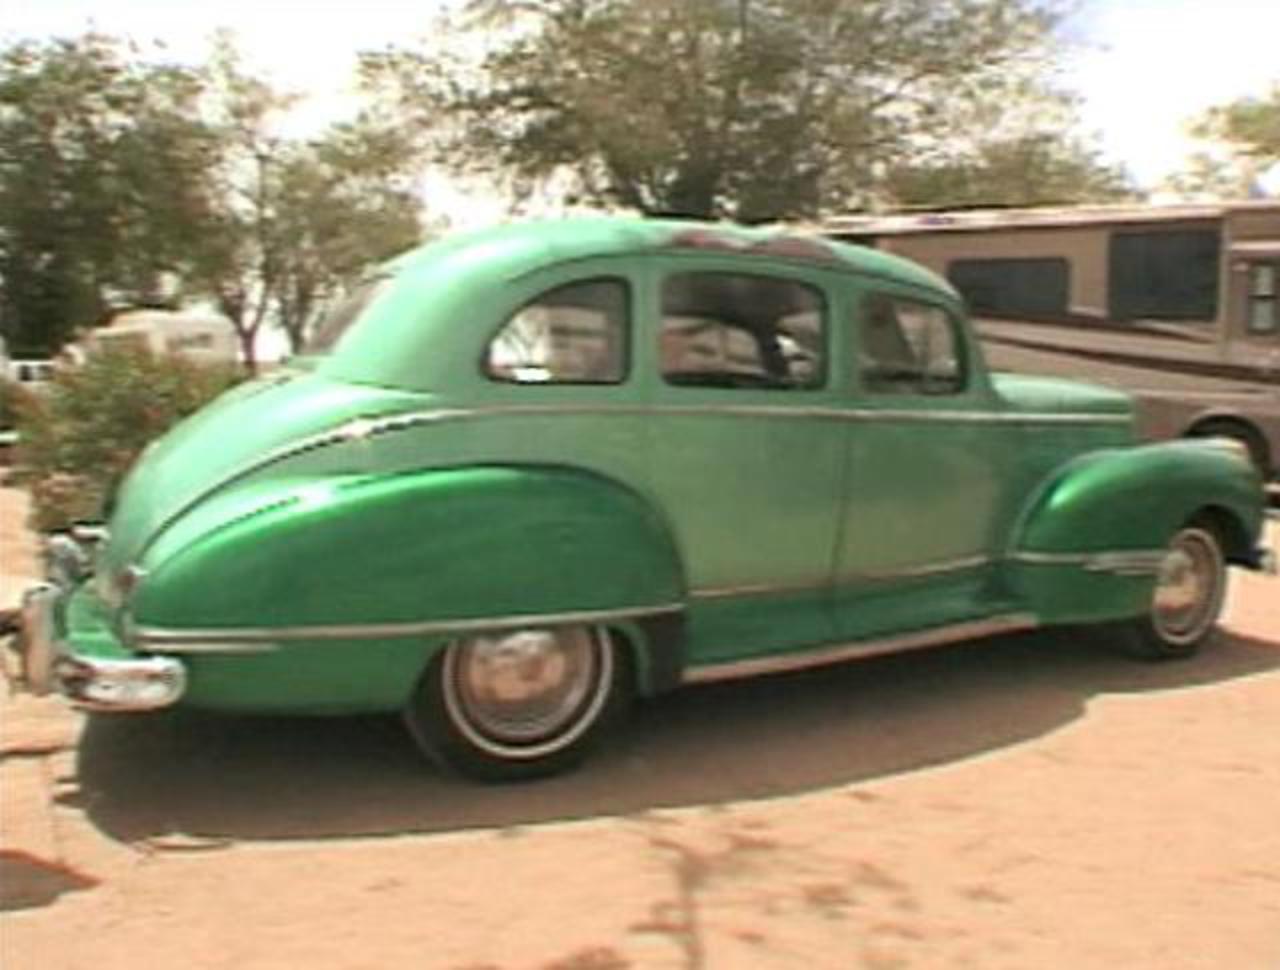 IMCDb.org: 1946 Hudson Commodore Eight in "Cars on Route 66, 2006"